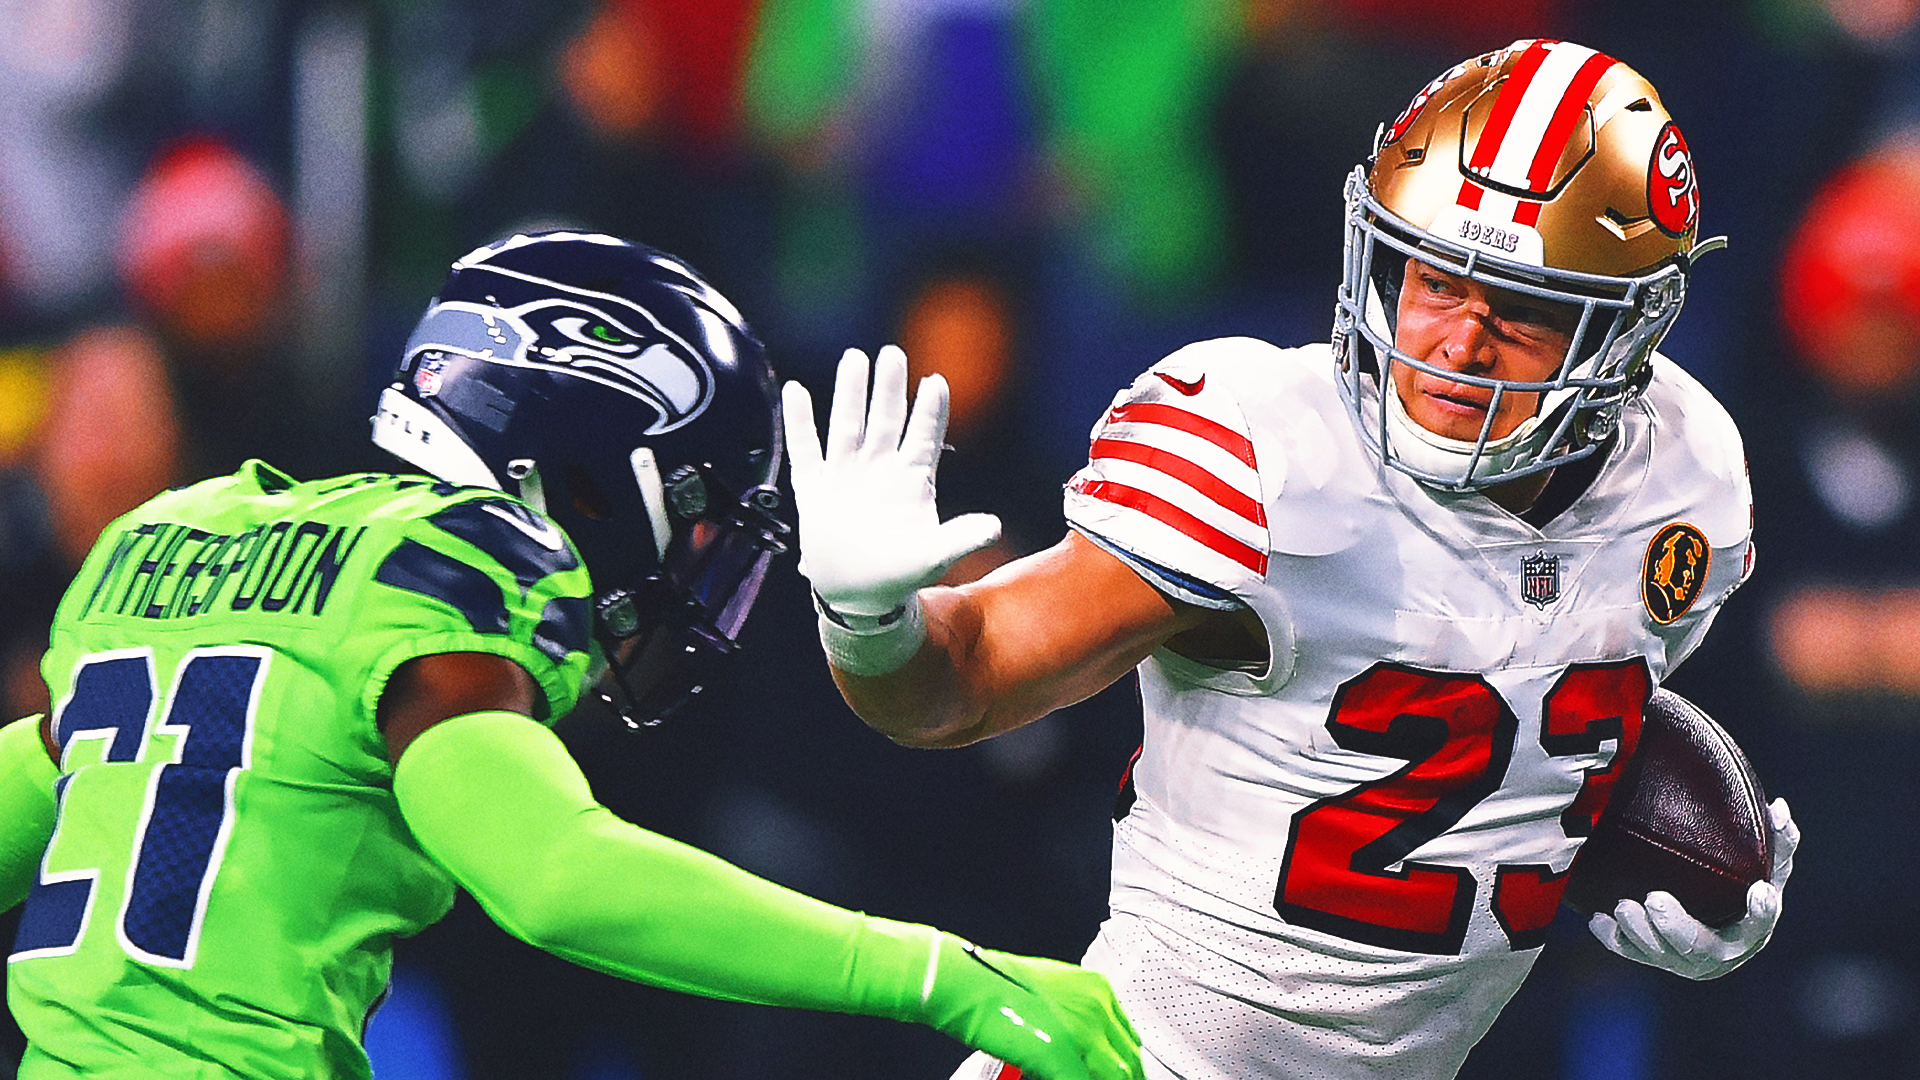 Christian McCaffrey's big first half carries NFC West-leading 49ers to 31-13 victory over Seahawks